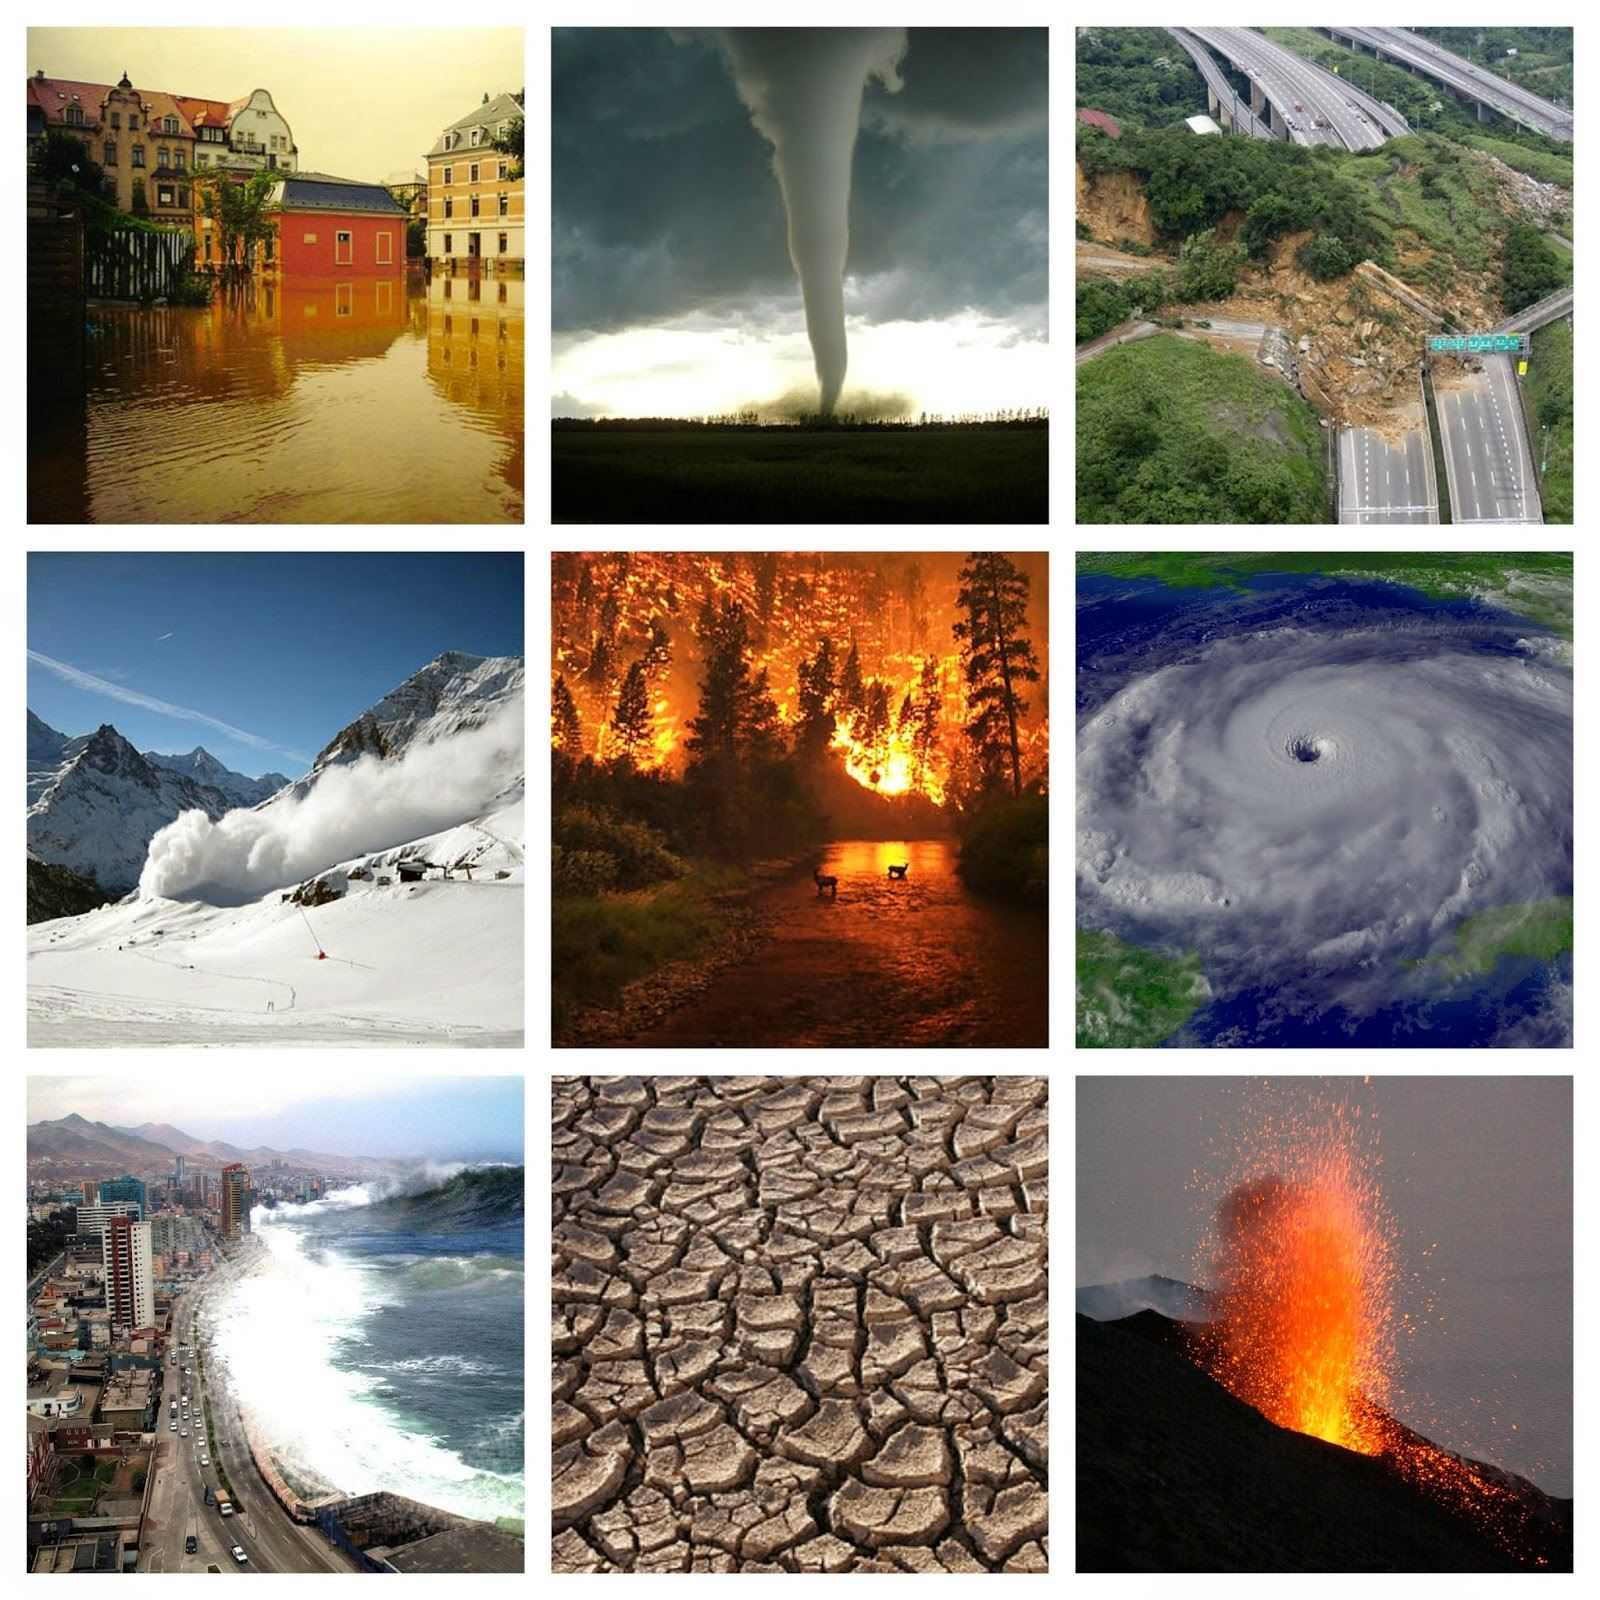 Examples of man-made and natural disasters